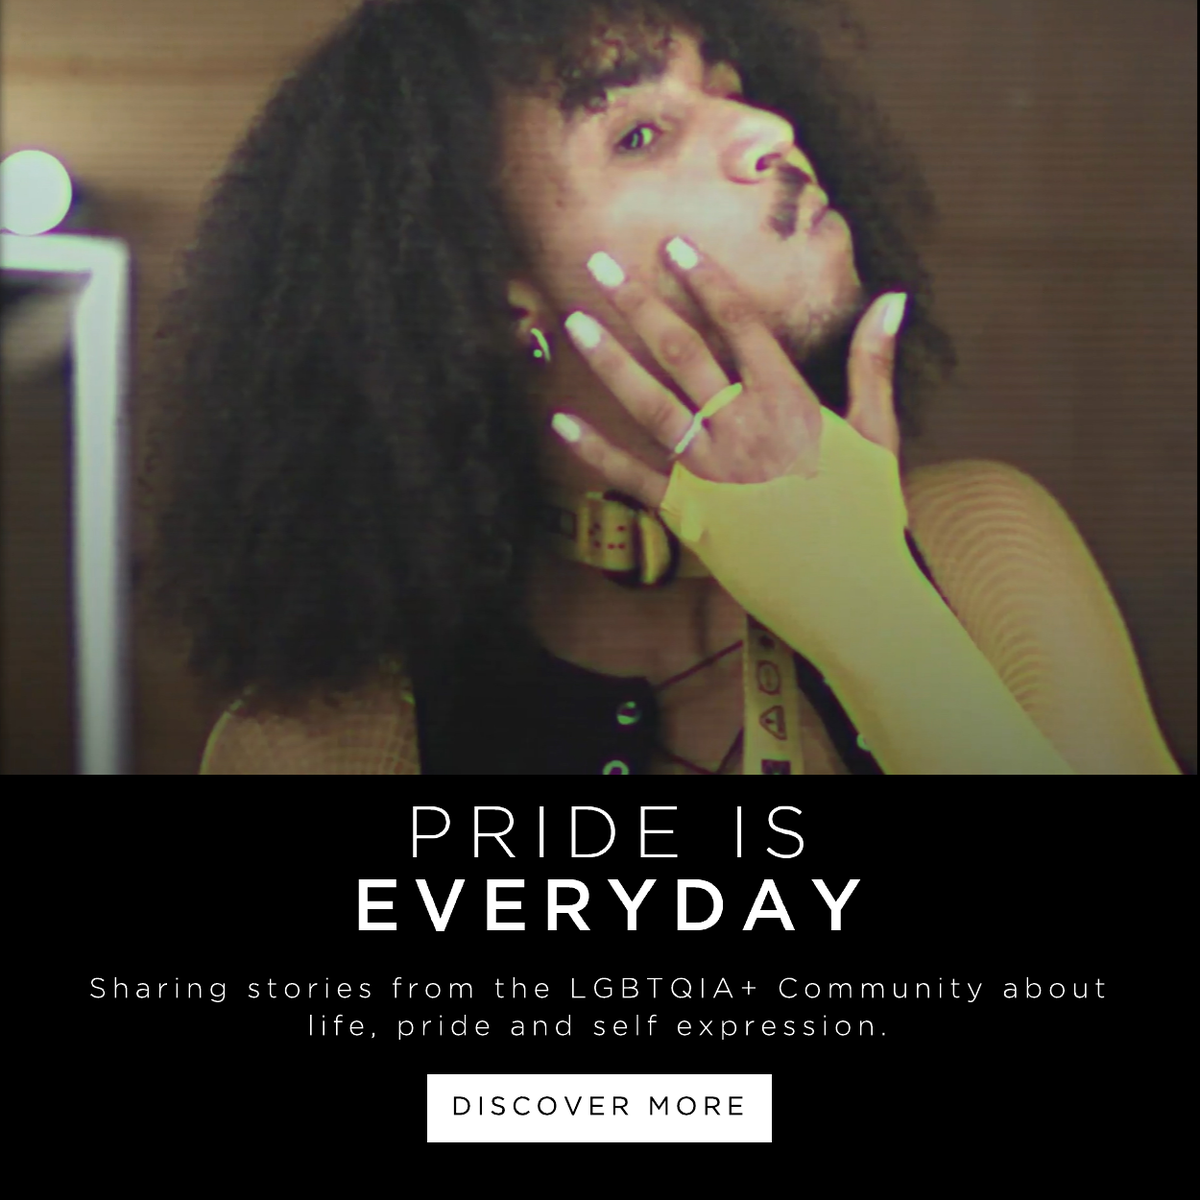 Josh and Spencer with the Pride is Everyday logo